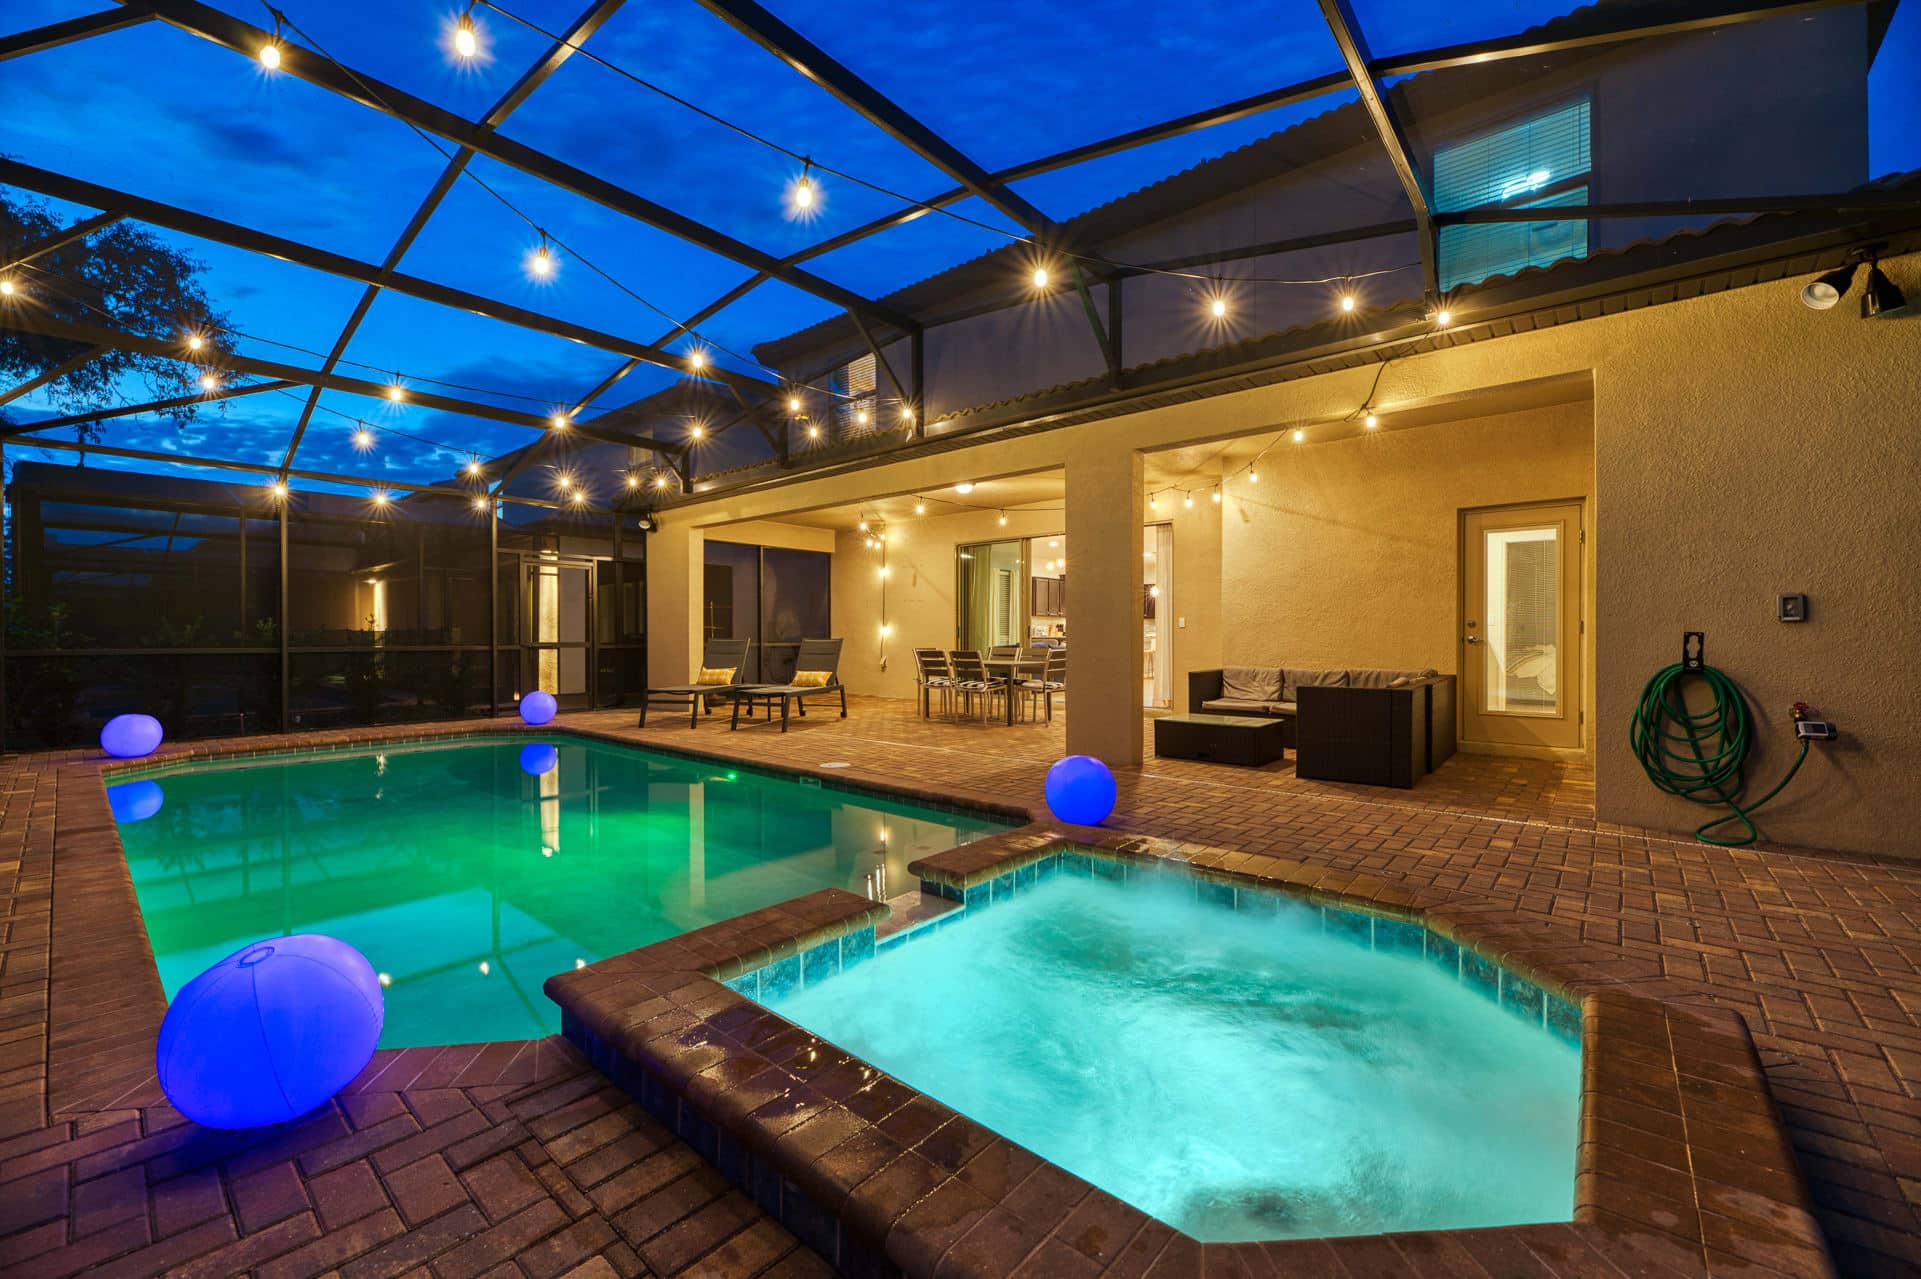 8 Bedroom Vacation Homes in Orlando - South Facing Private Pool